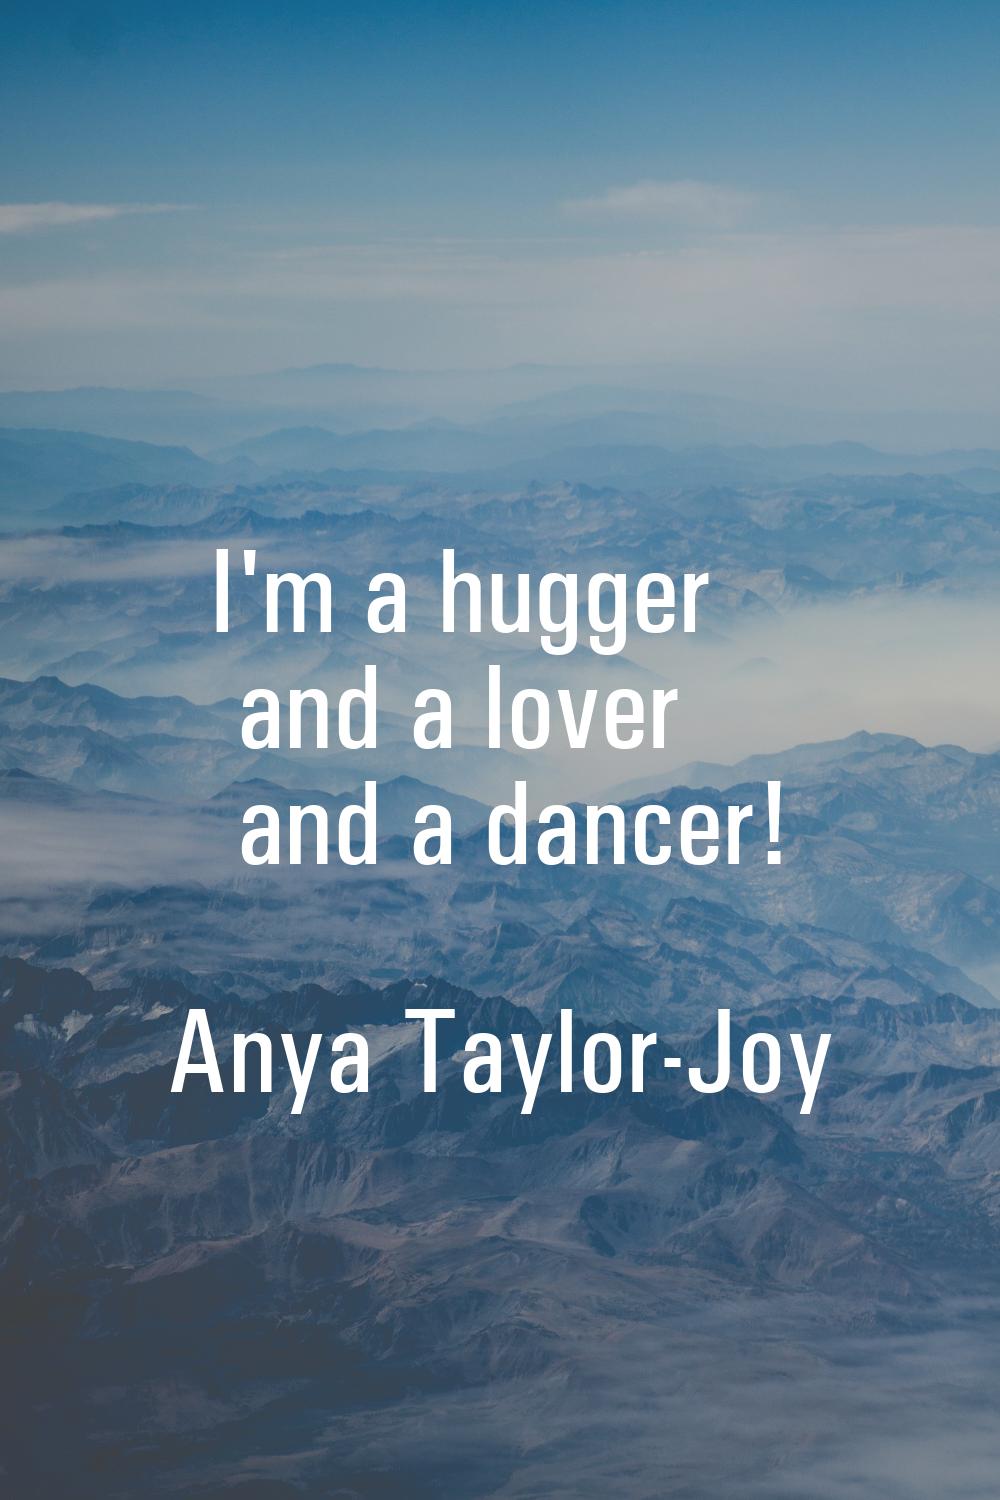 I'm a hugger and a lover and a dancer!